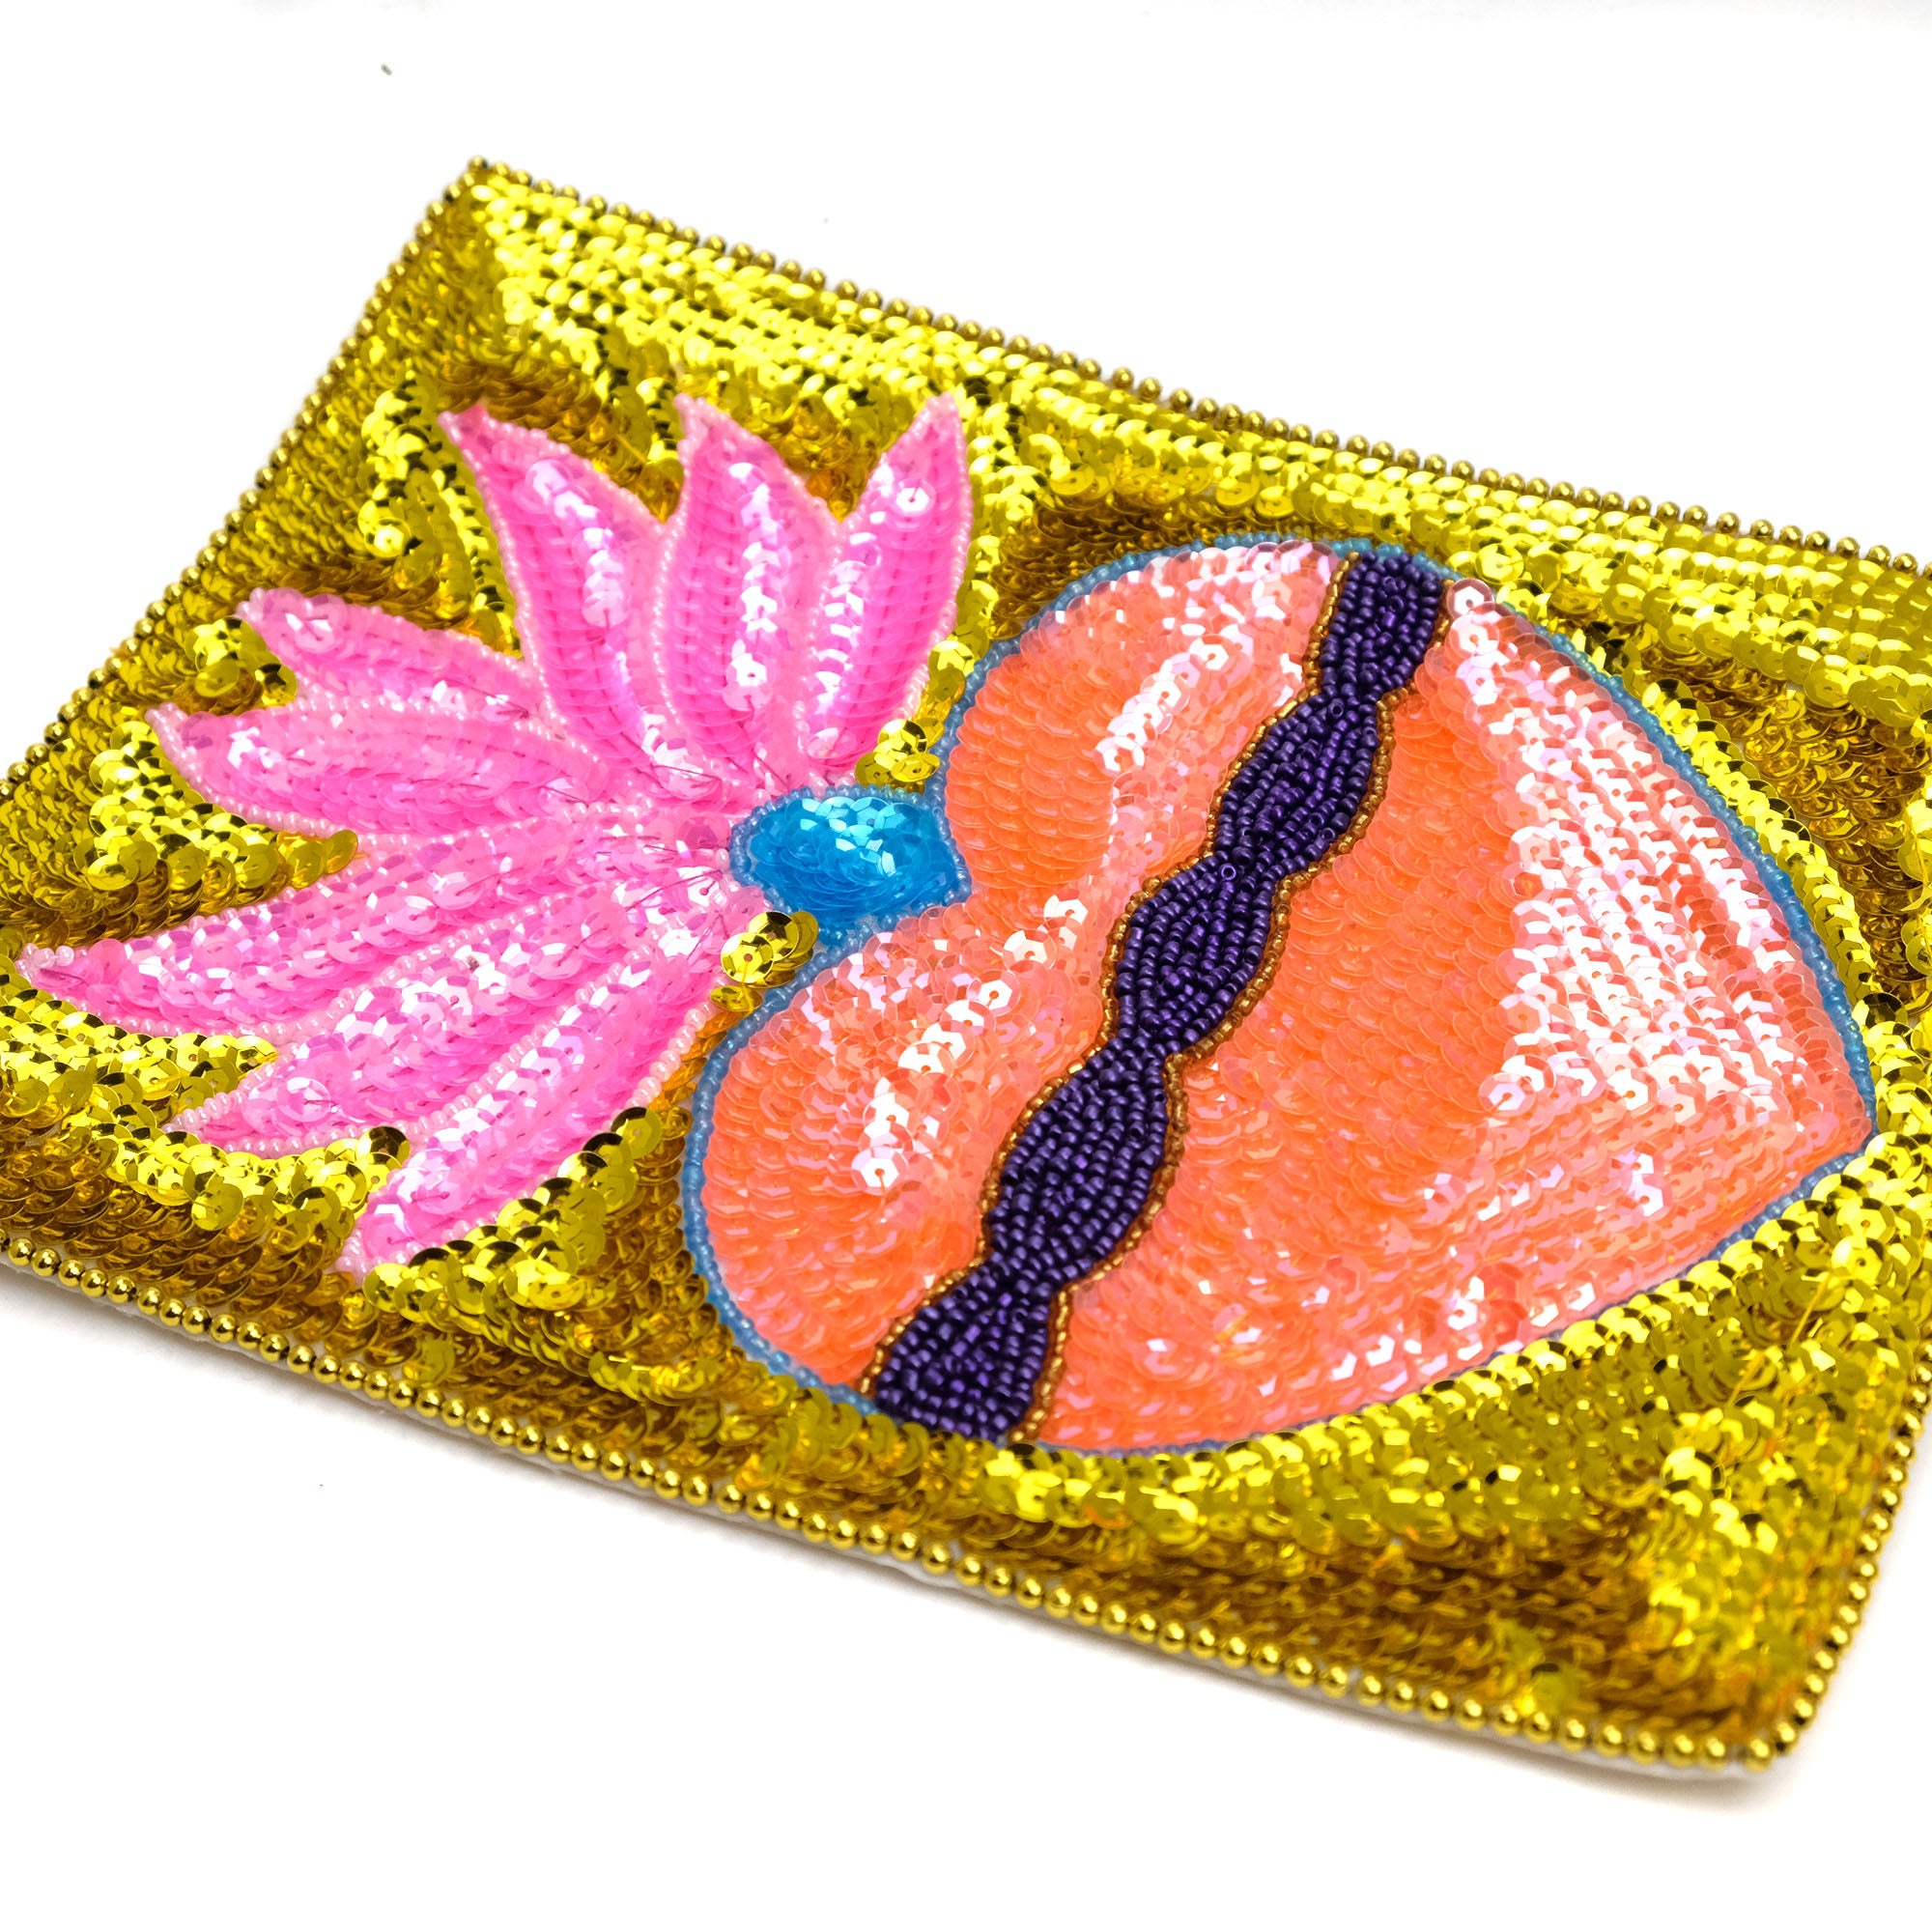 Pink Sequin Heart #1 - Patch